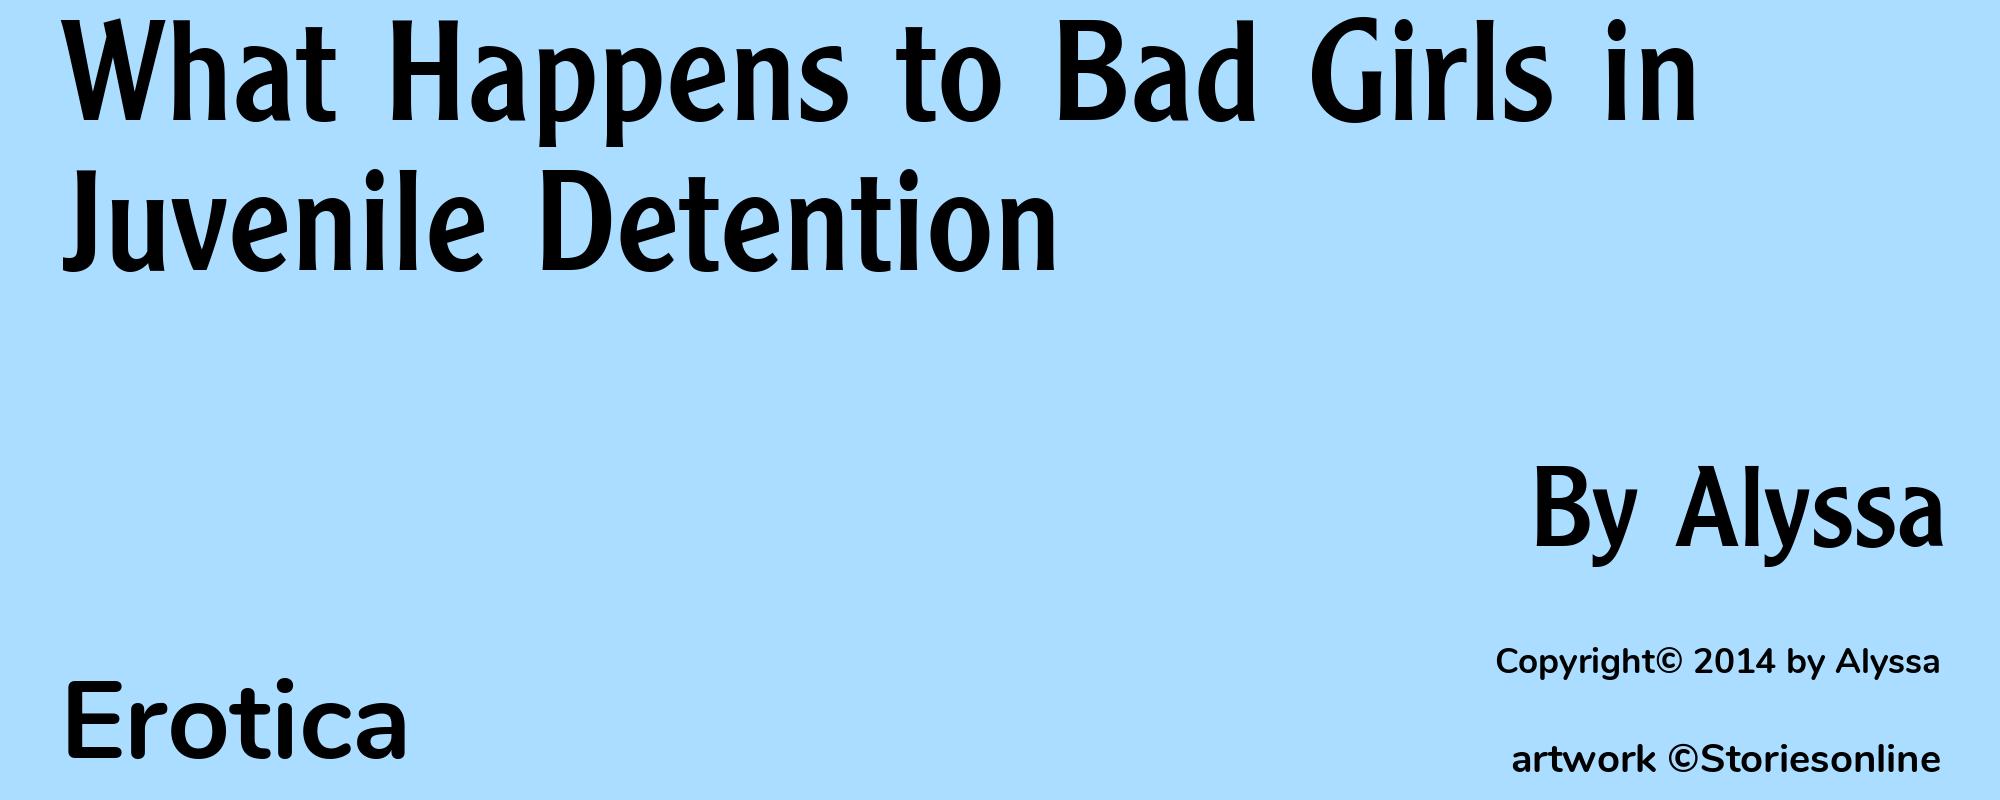 What Happens to Bad Girls in Juvenile Detention - Cover